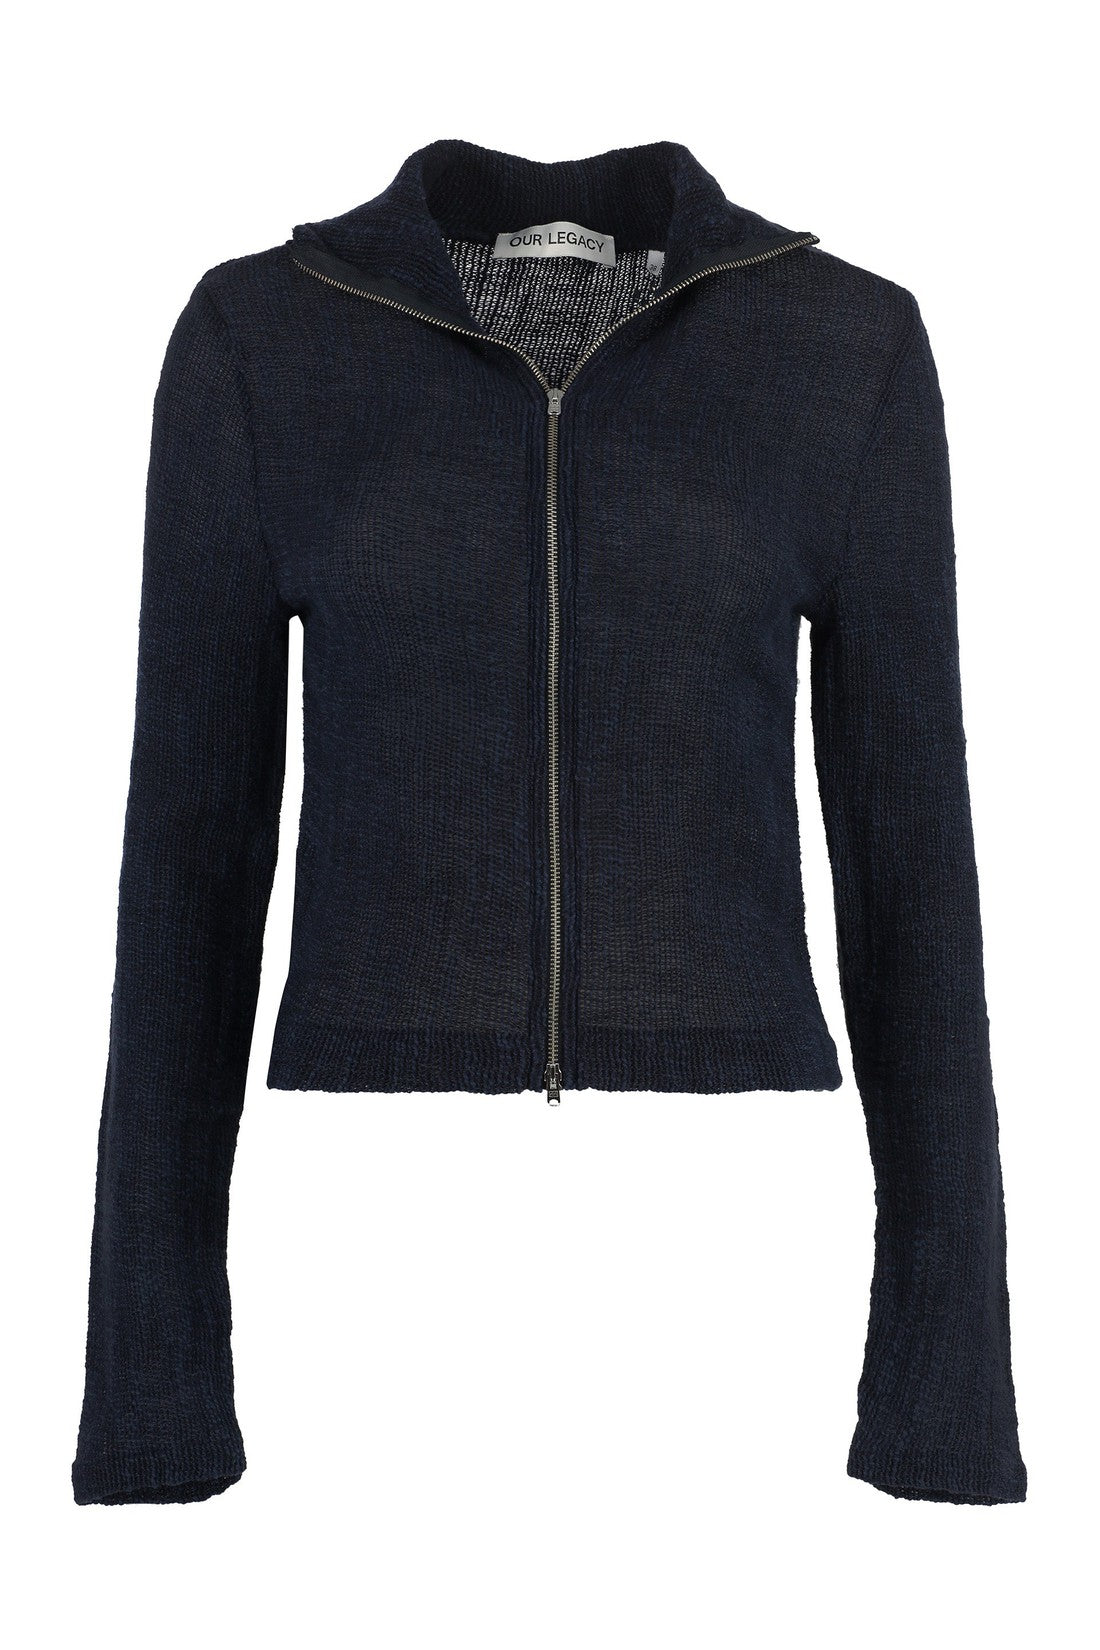 Our Legacy-OUTLET-SALE-High collar zipped cardigan-ARCHIVIST